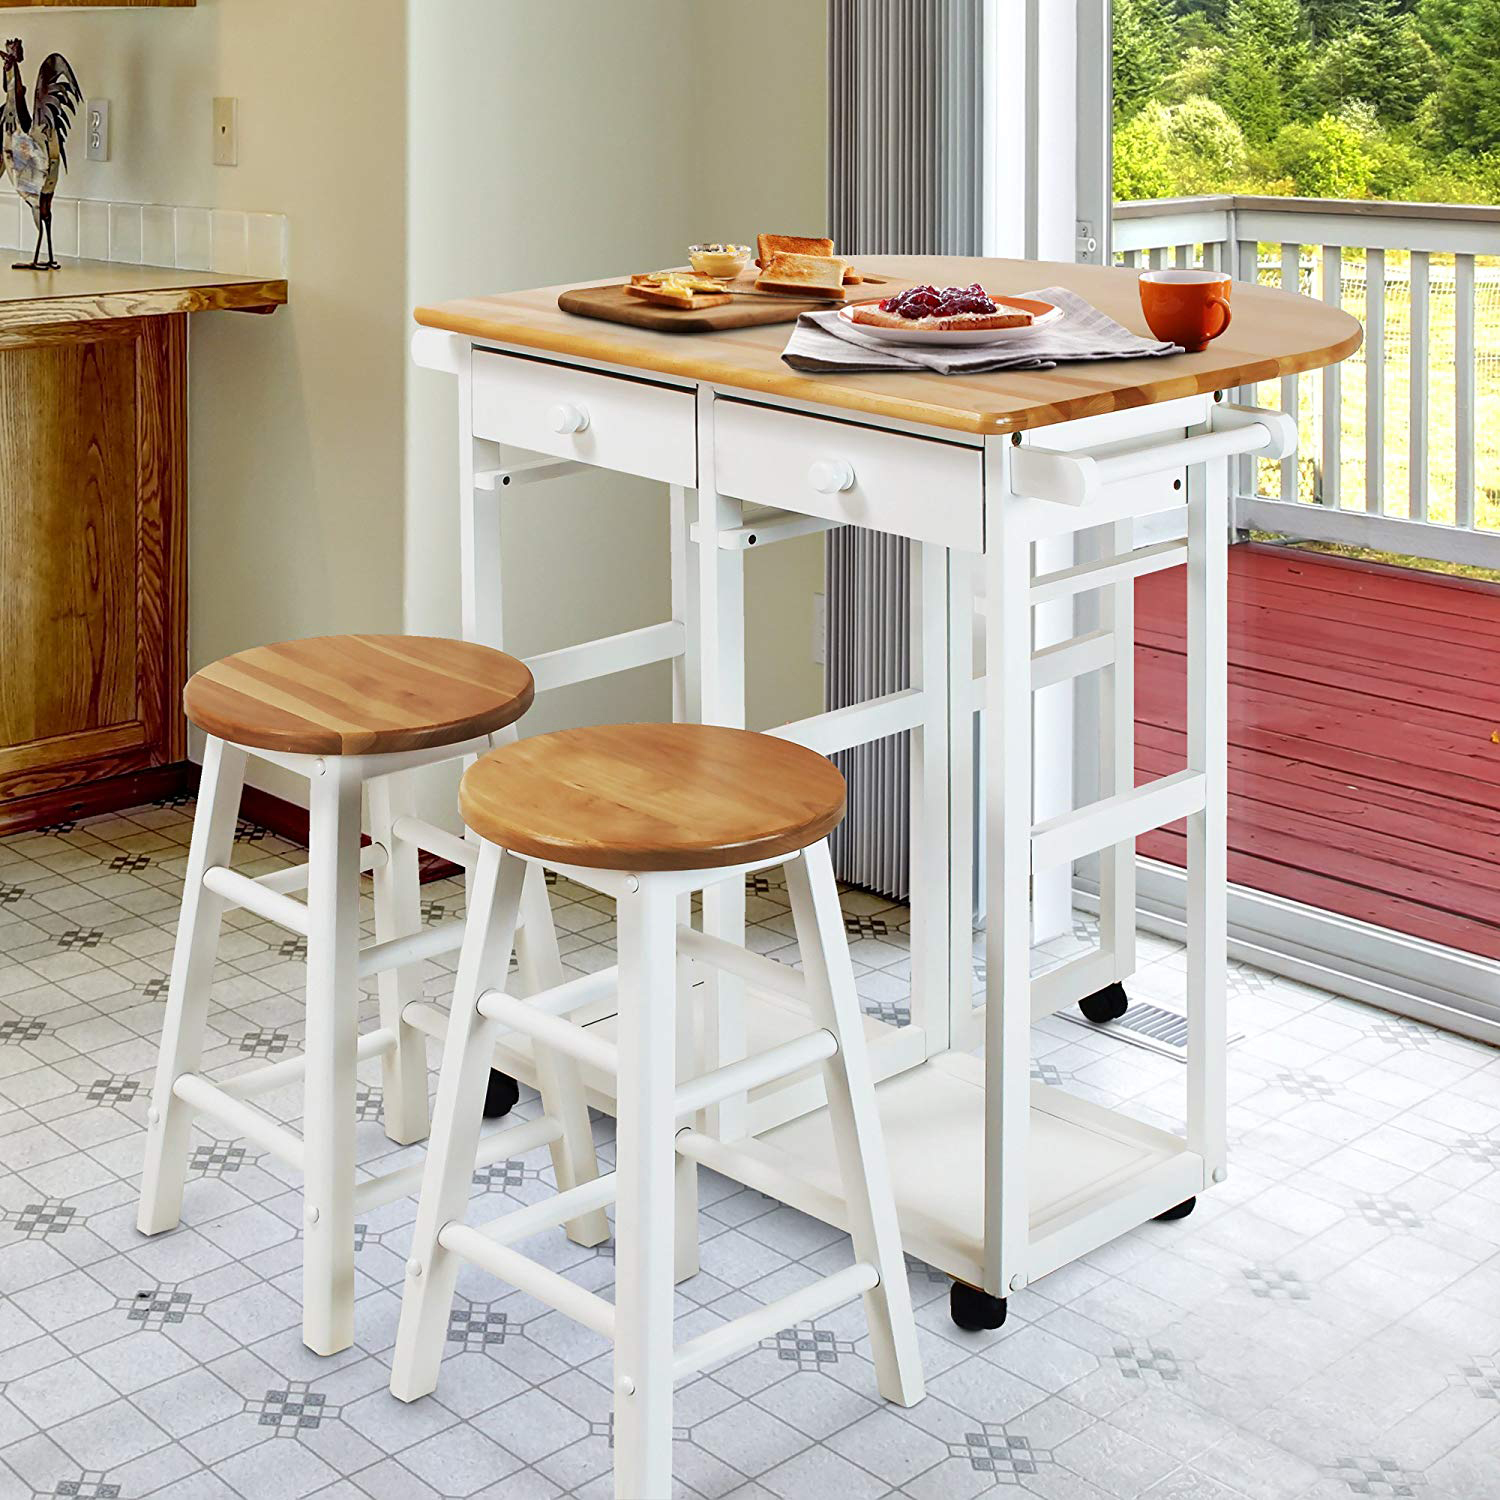 Buy Ktaxon Kitchen Cart Island Rolling Home Dining Wooden Trolley Storage With 2 Stools In White And Natural Online In Turkey 209060901